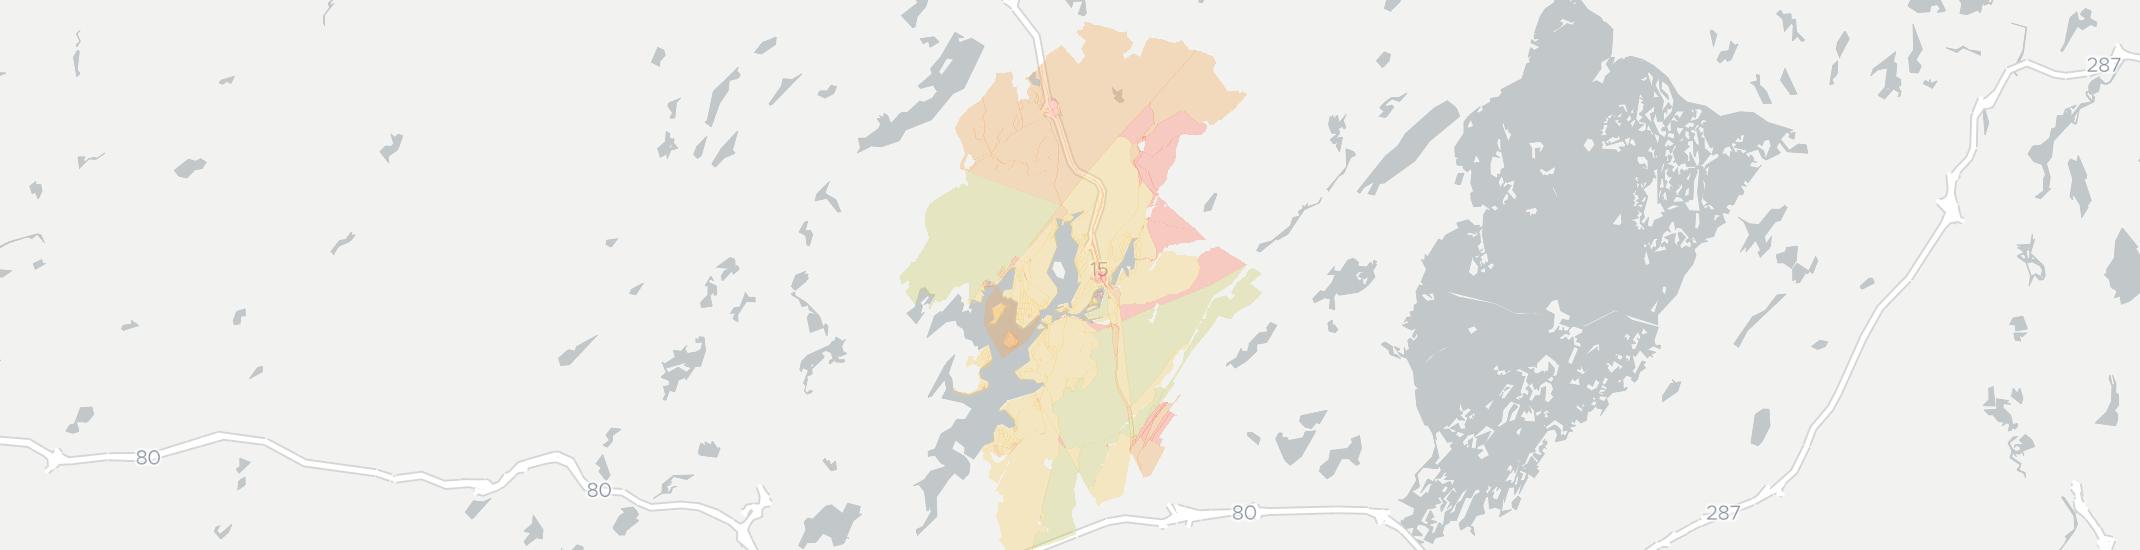 Lake Hopatcong Internet Competition Map. Click for interactive map